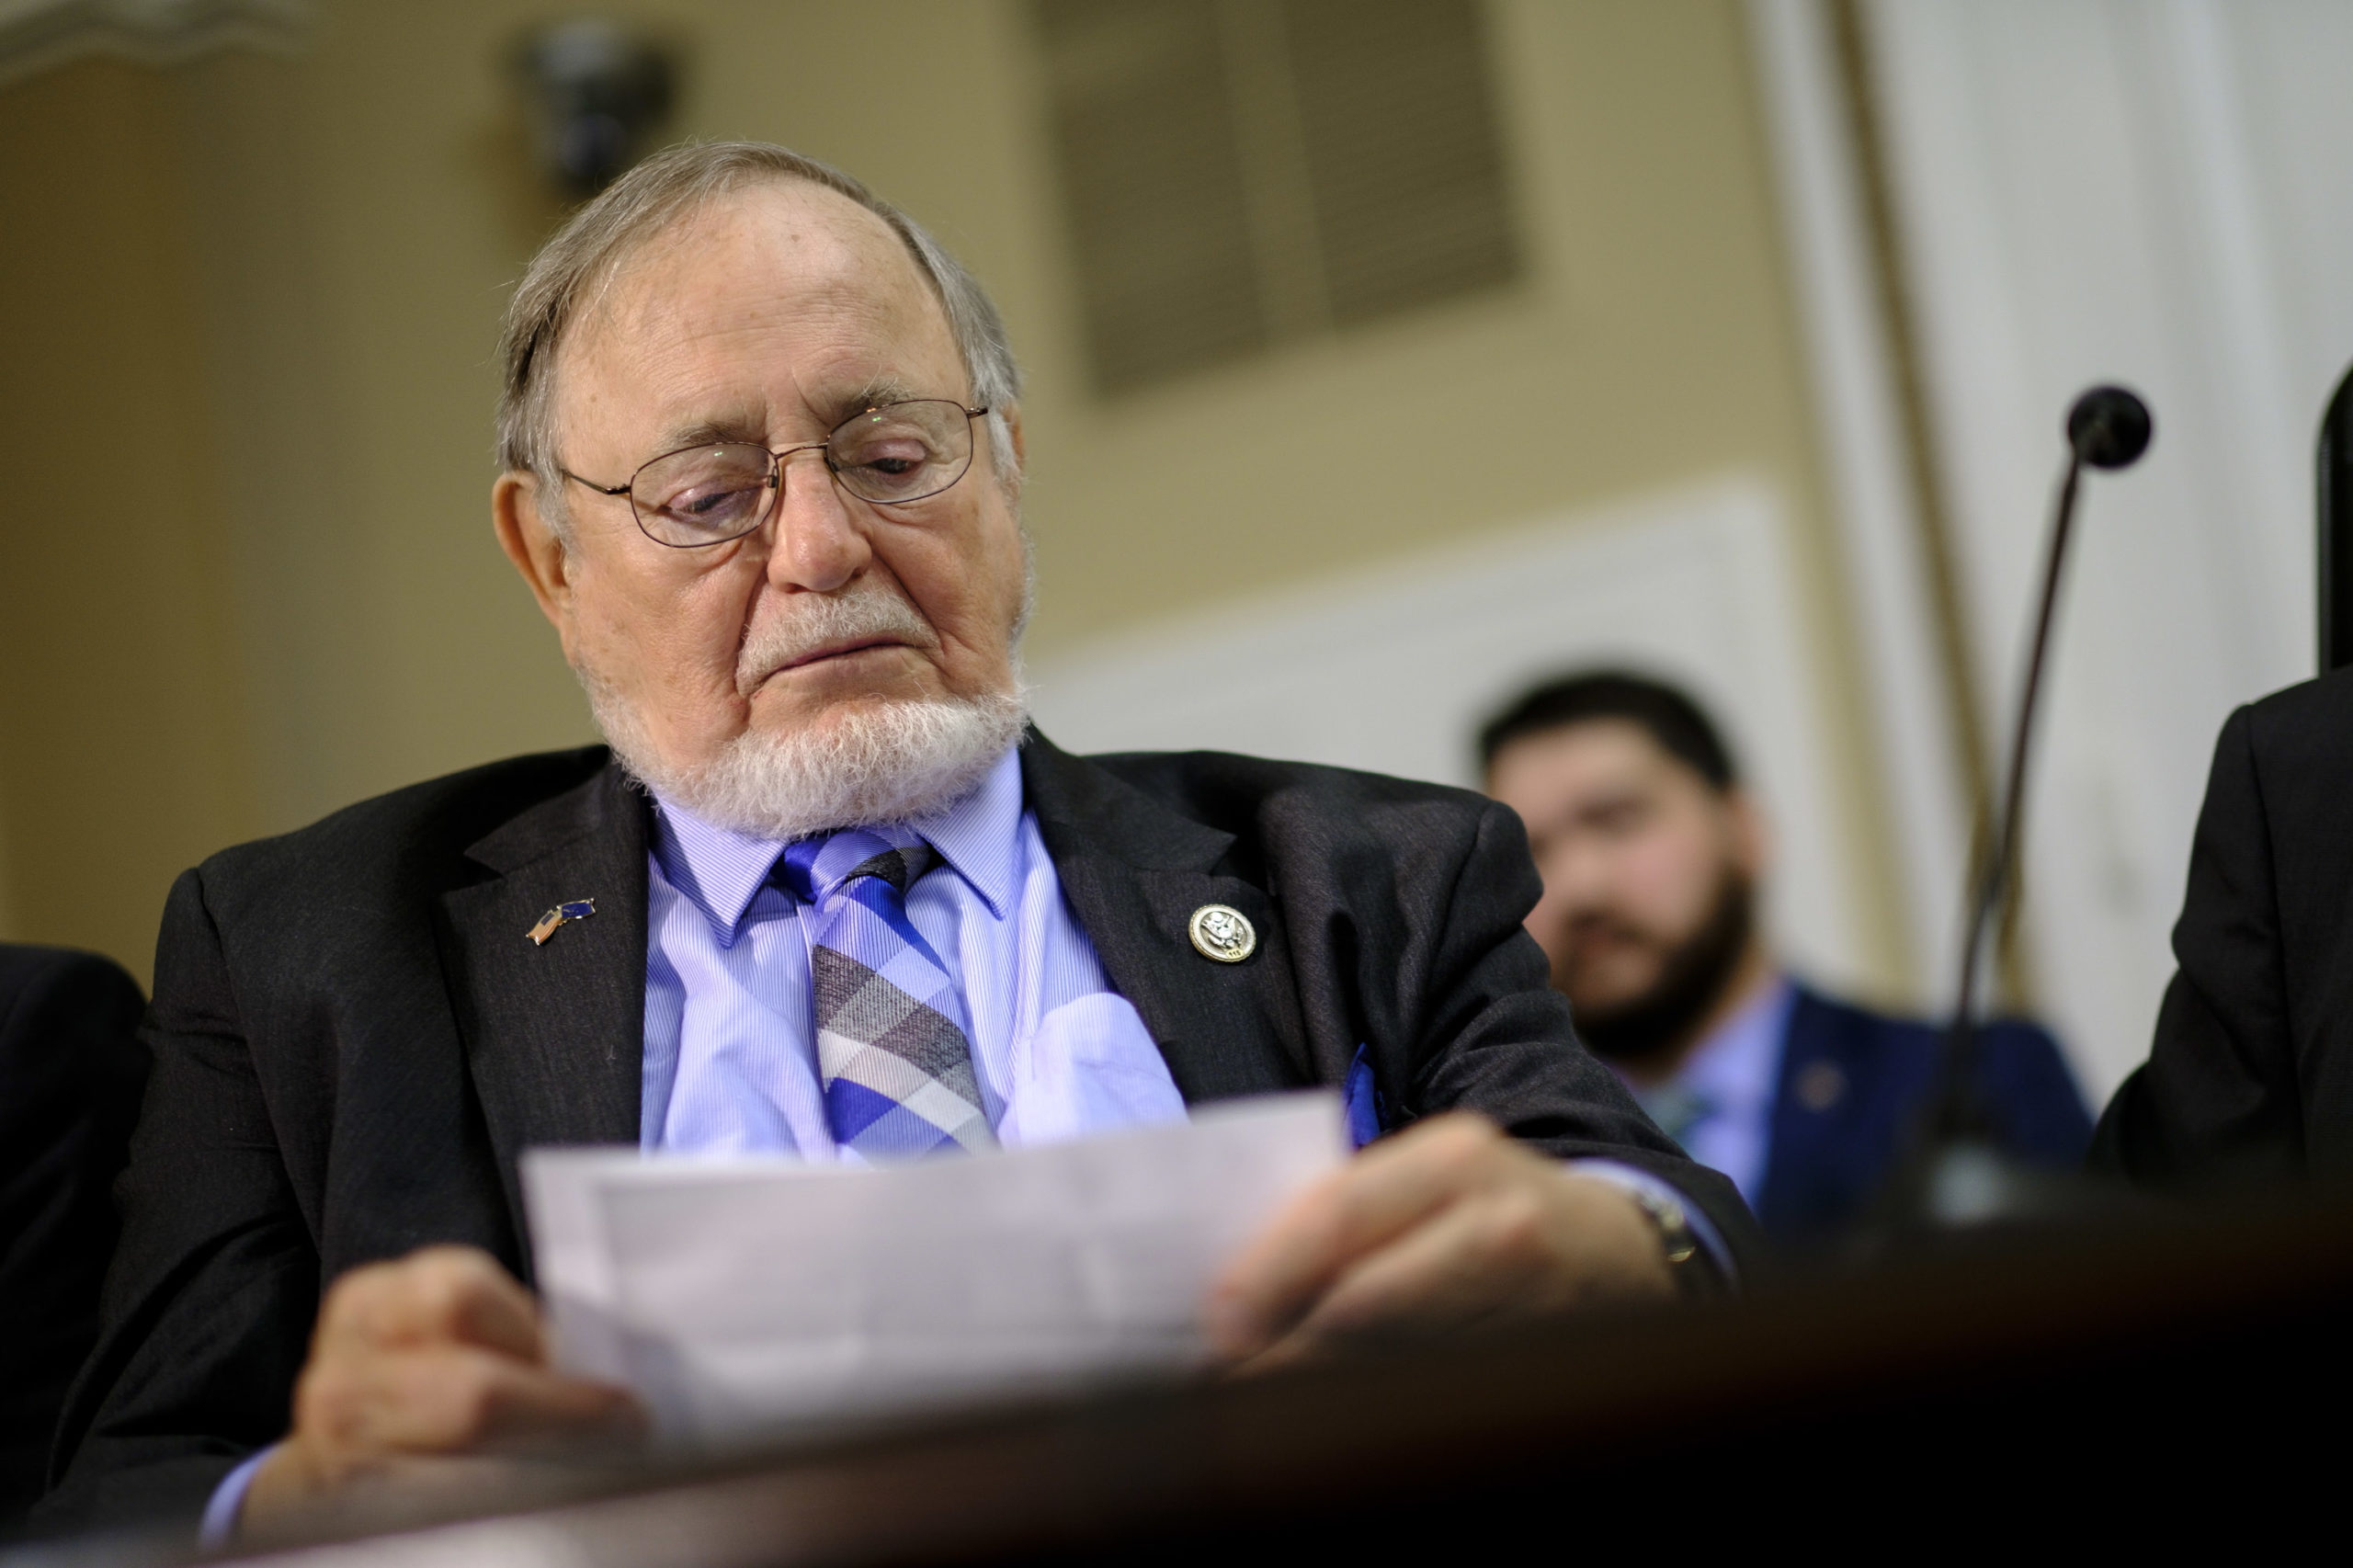 Rep. Don Young (R-AK) reads over an amendment he plans to offer to the National Defense Authorization Act for approval so they can be debated on the floor of the House on July 12, 2017 in Washington, DC. (Photo by Pete Marovich/Getty Images)